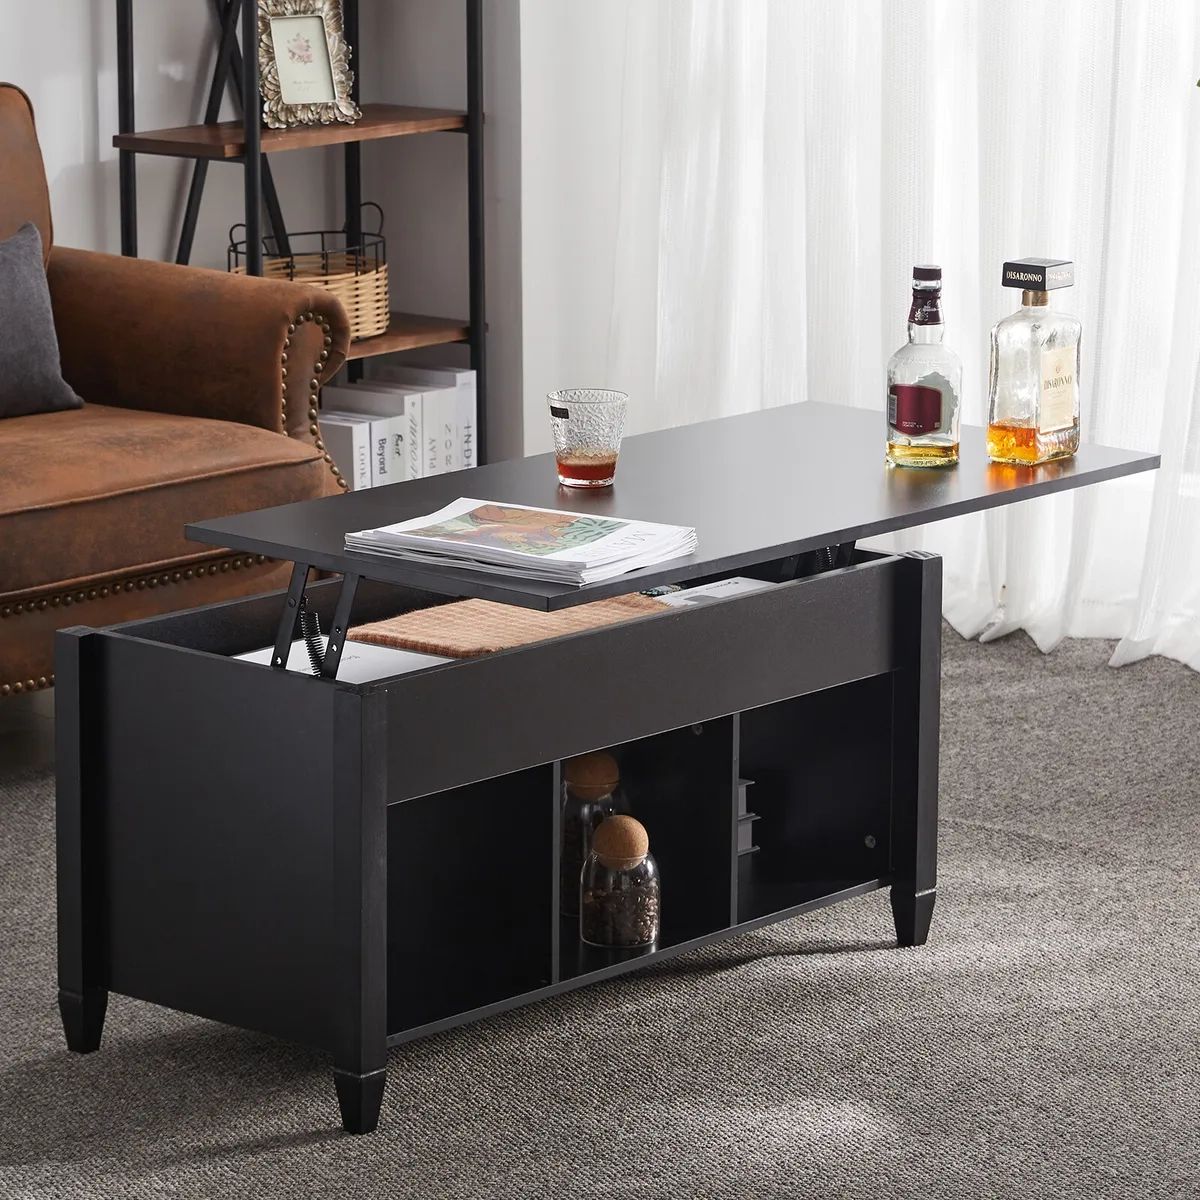 Modern Lift Top Coffee Table W/hidden Compartment And Storage For Living  Room Us | Ebay Pertaining To Modern Coffee Tables With Hidden Storage Compartments (View 15 of 15)